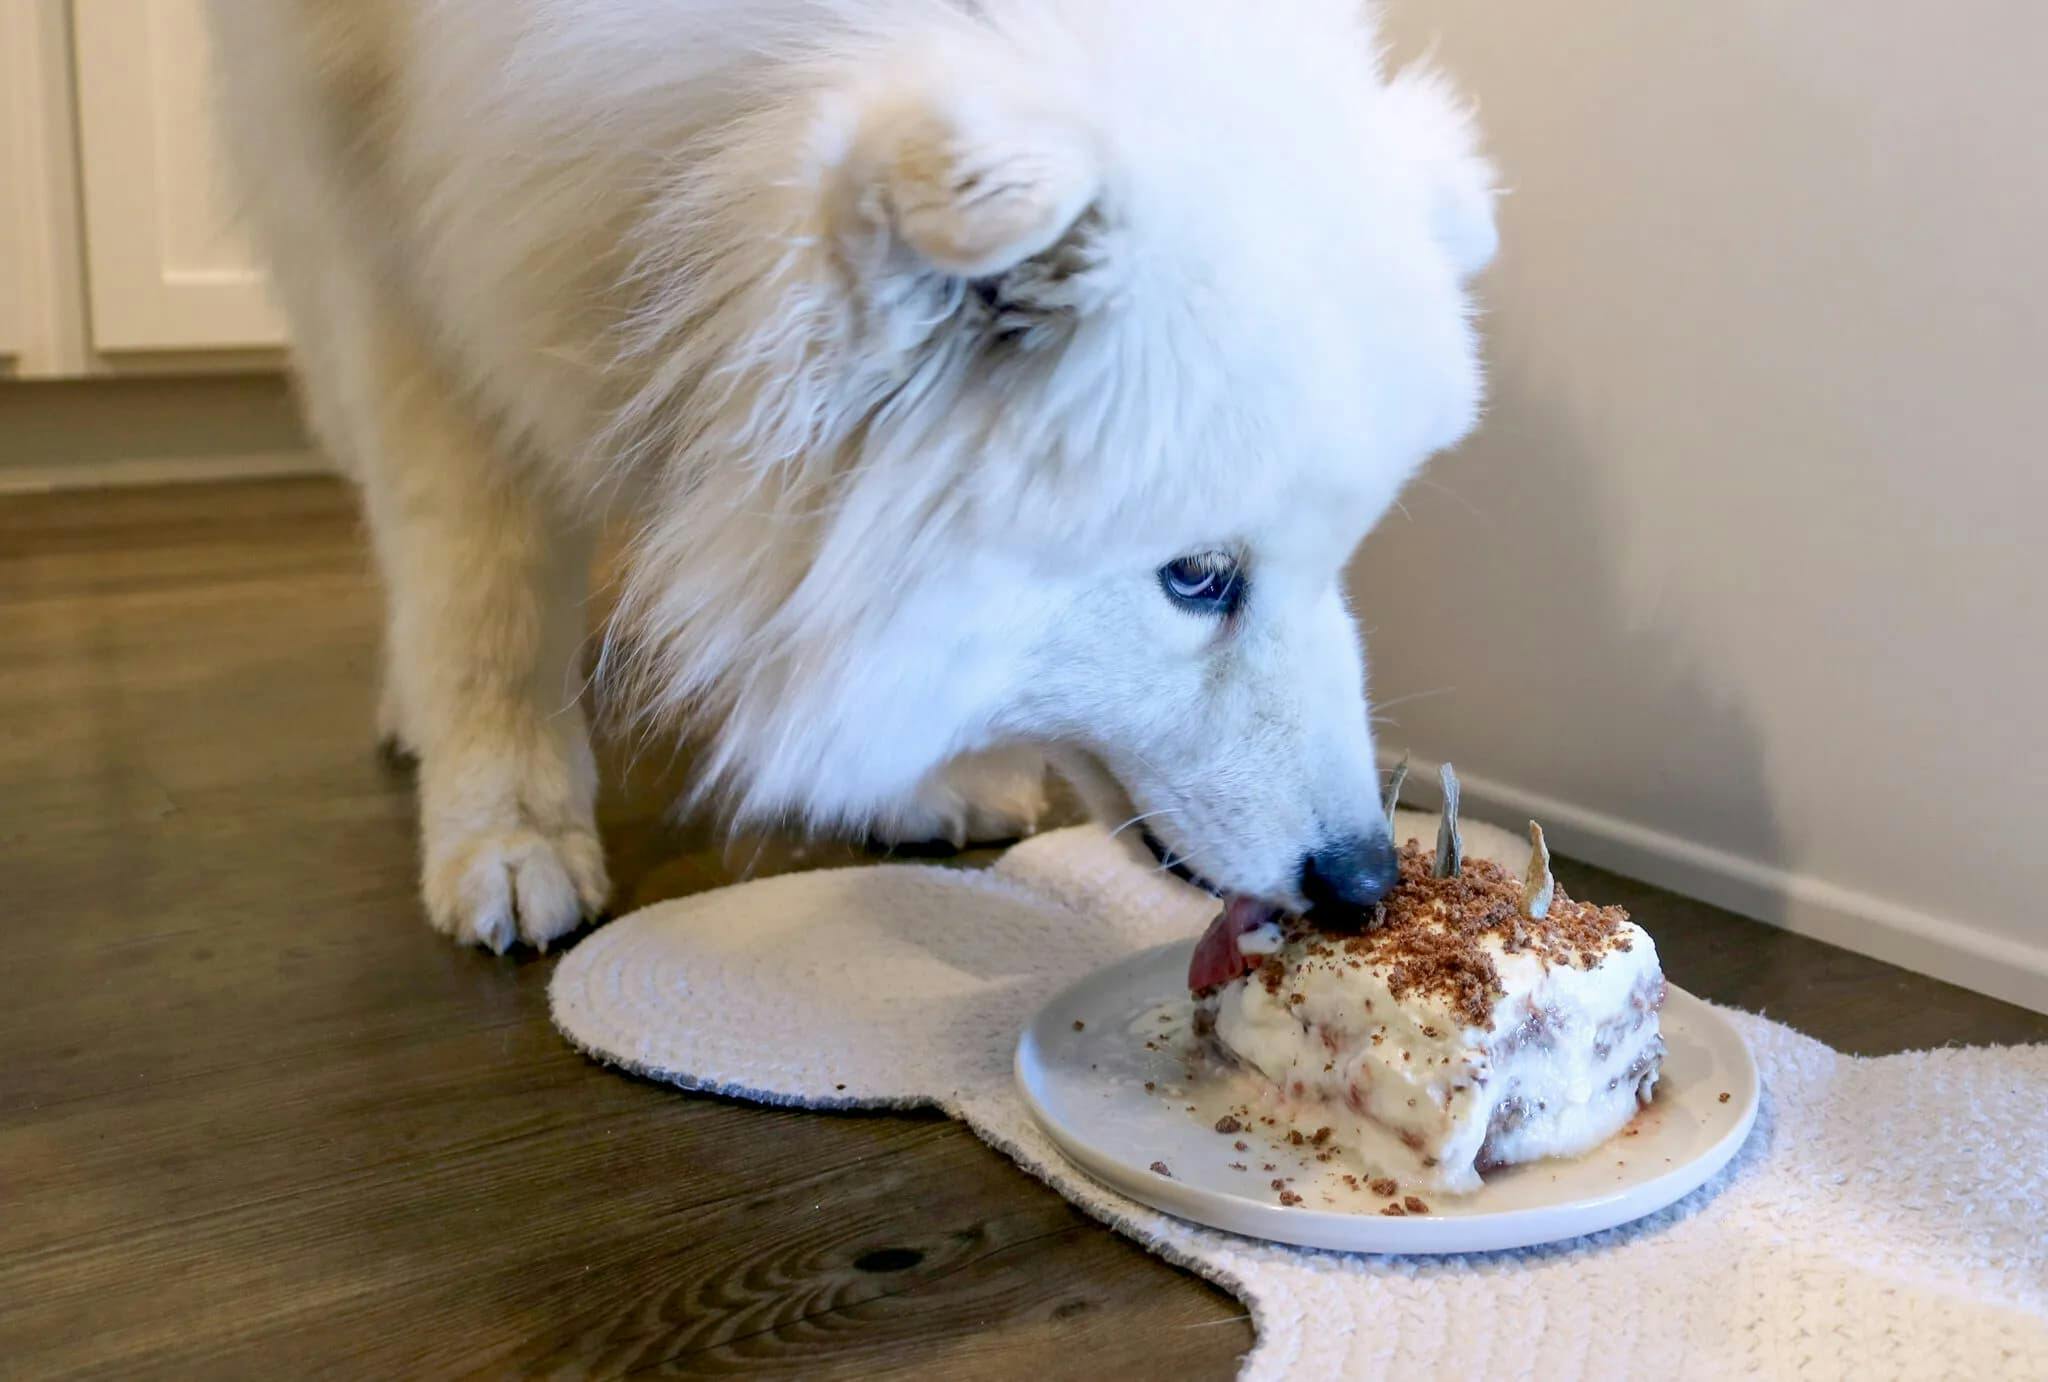 Celebrate Your Dog's Birthday in Style with this Gluten-Free, Grain-Free, and Guilt-Free Cake Recipe